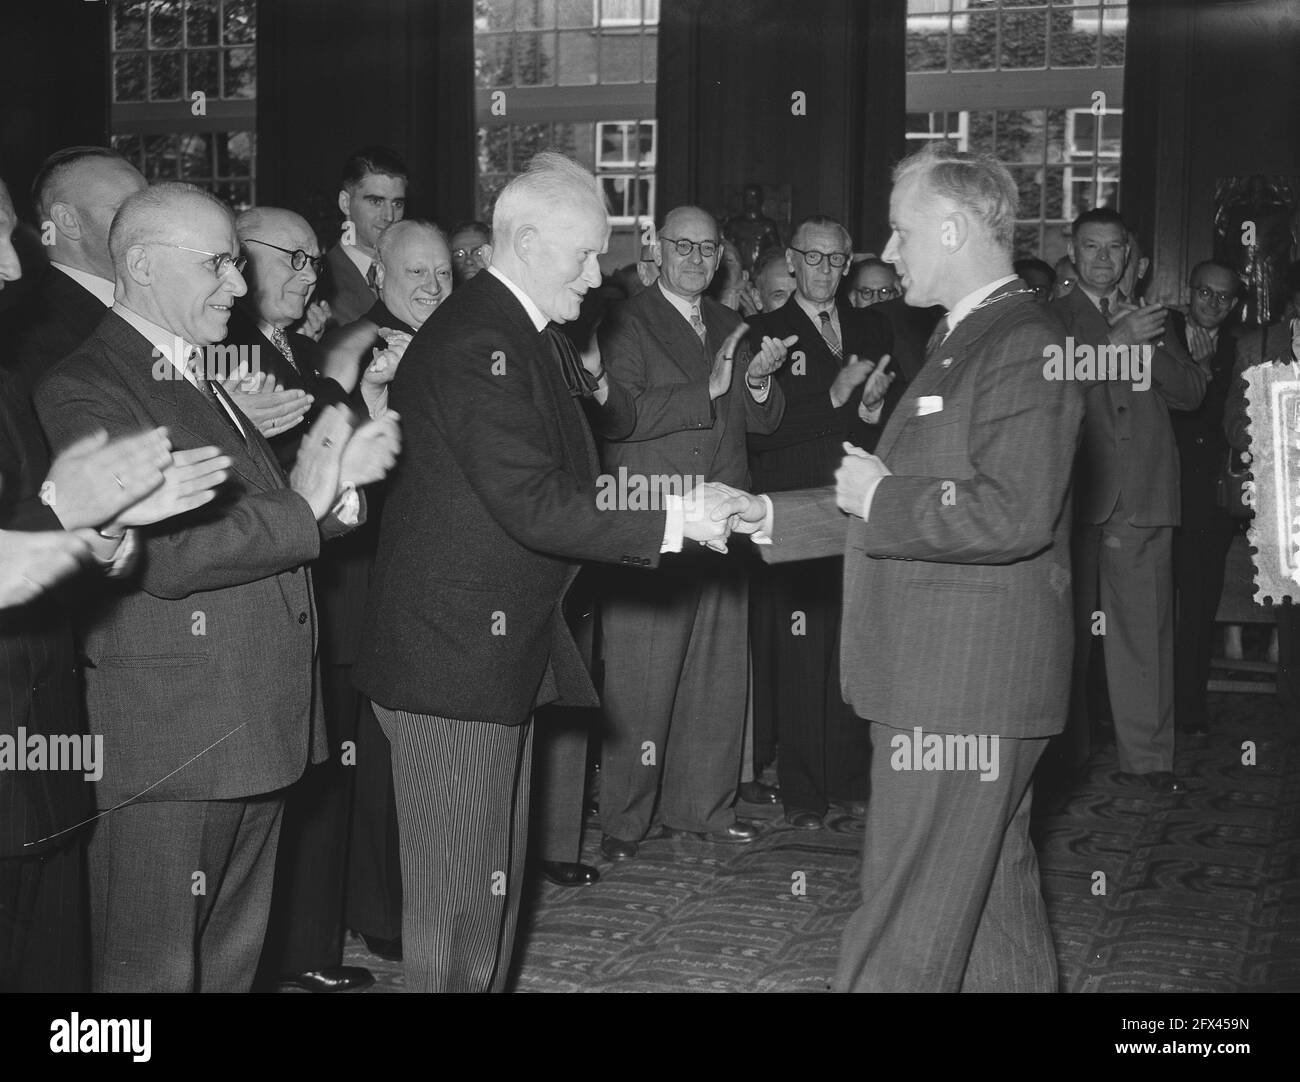 100th anniversary Men's Singing Society Apollo . Reception in the Amsterdam town hall, June 3, 1953, Recipes, town halls, The Netherlands, 20th century press agency photo, news to remember, documentary, historic photography 1945-1990, visual stories, human history of the Twentieth Century, capturing moments in time Stock Photo